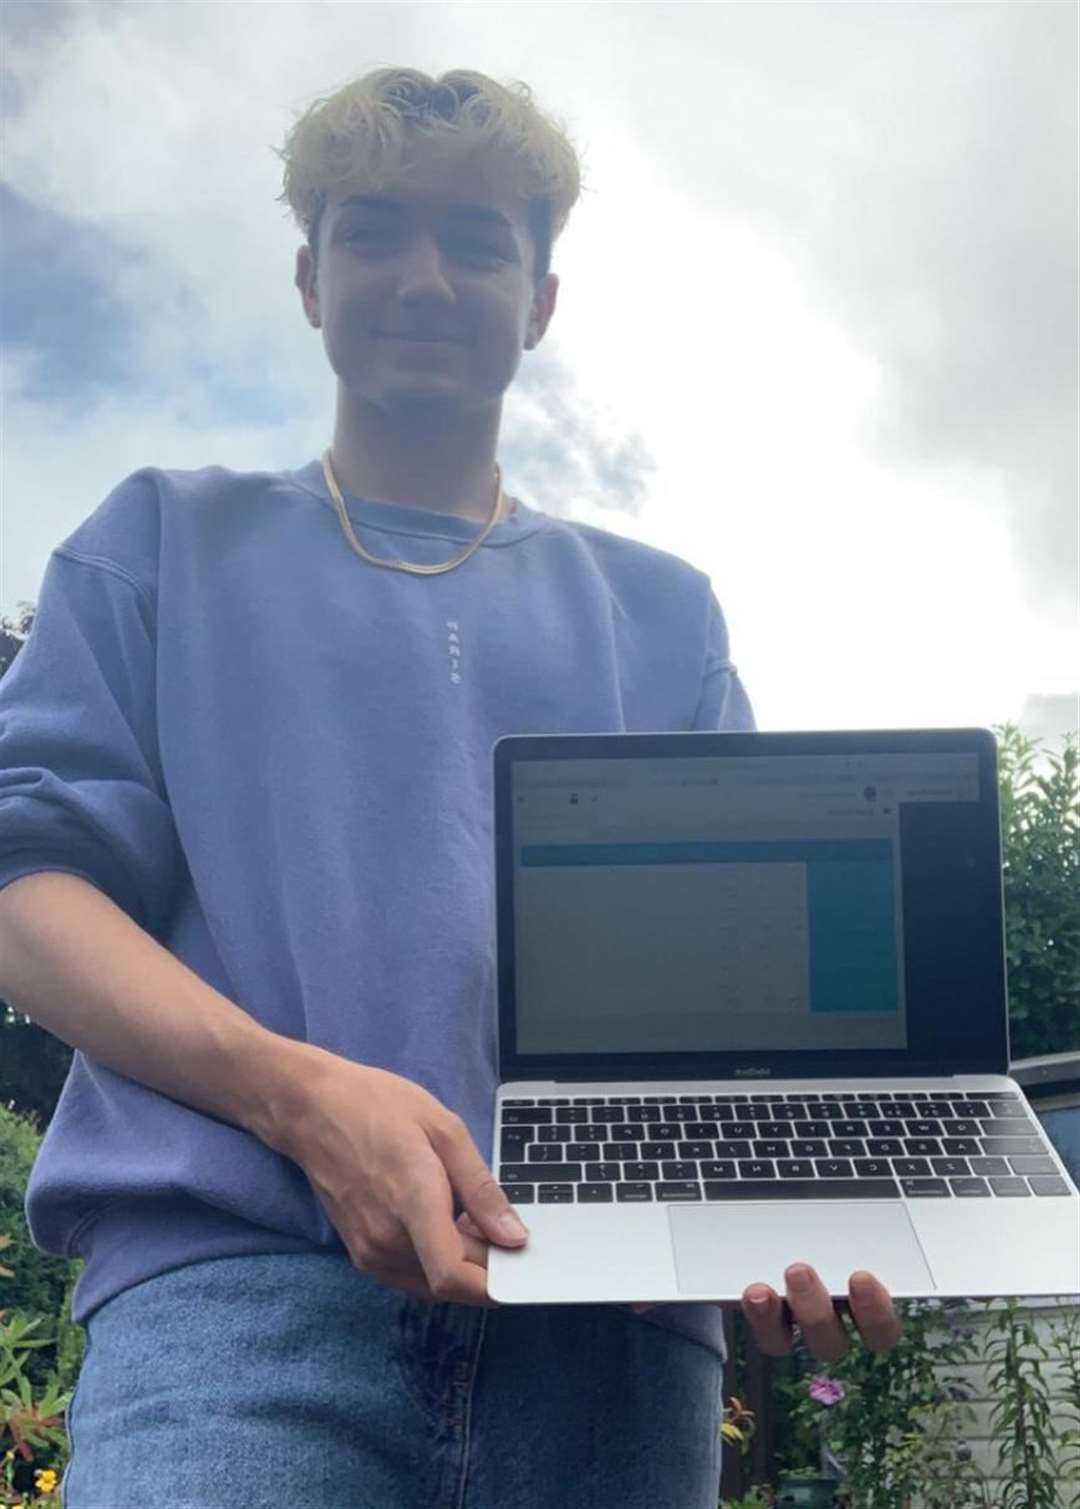 Westlands pupil Owen Halse discovered his GCSE results online at home. He was one of the Sittingbourne school's top performers with four nine grades. He said: "I'm delighted with my results."